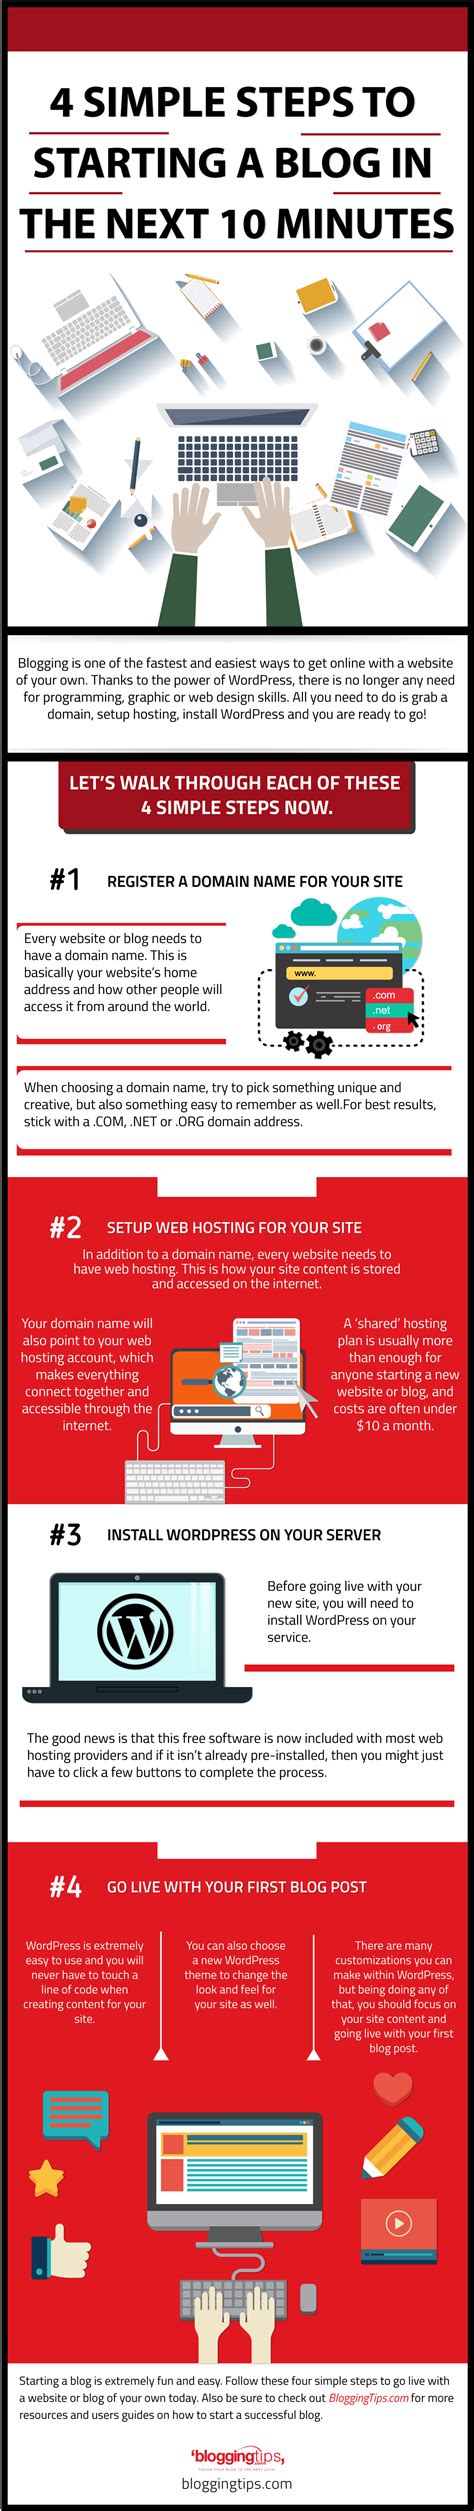 4 Simple Steps To Starting A Blog In The Next 10 Minutes Infographic